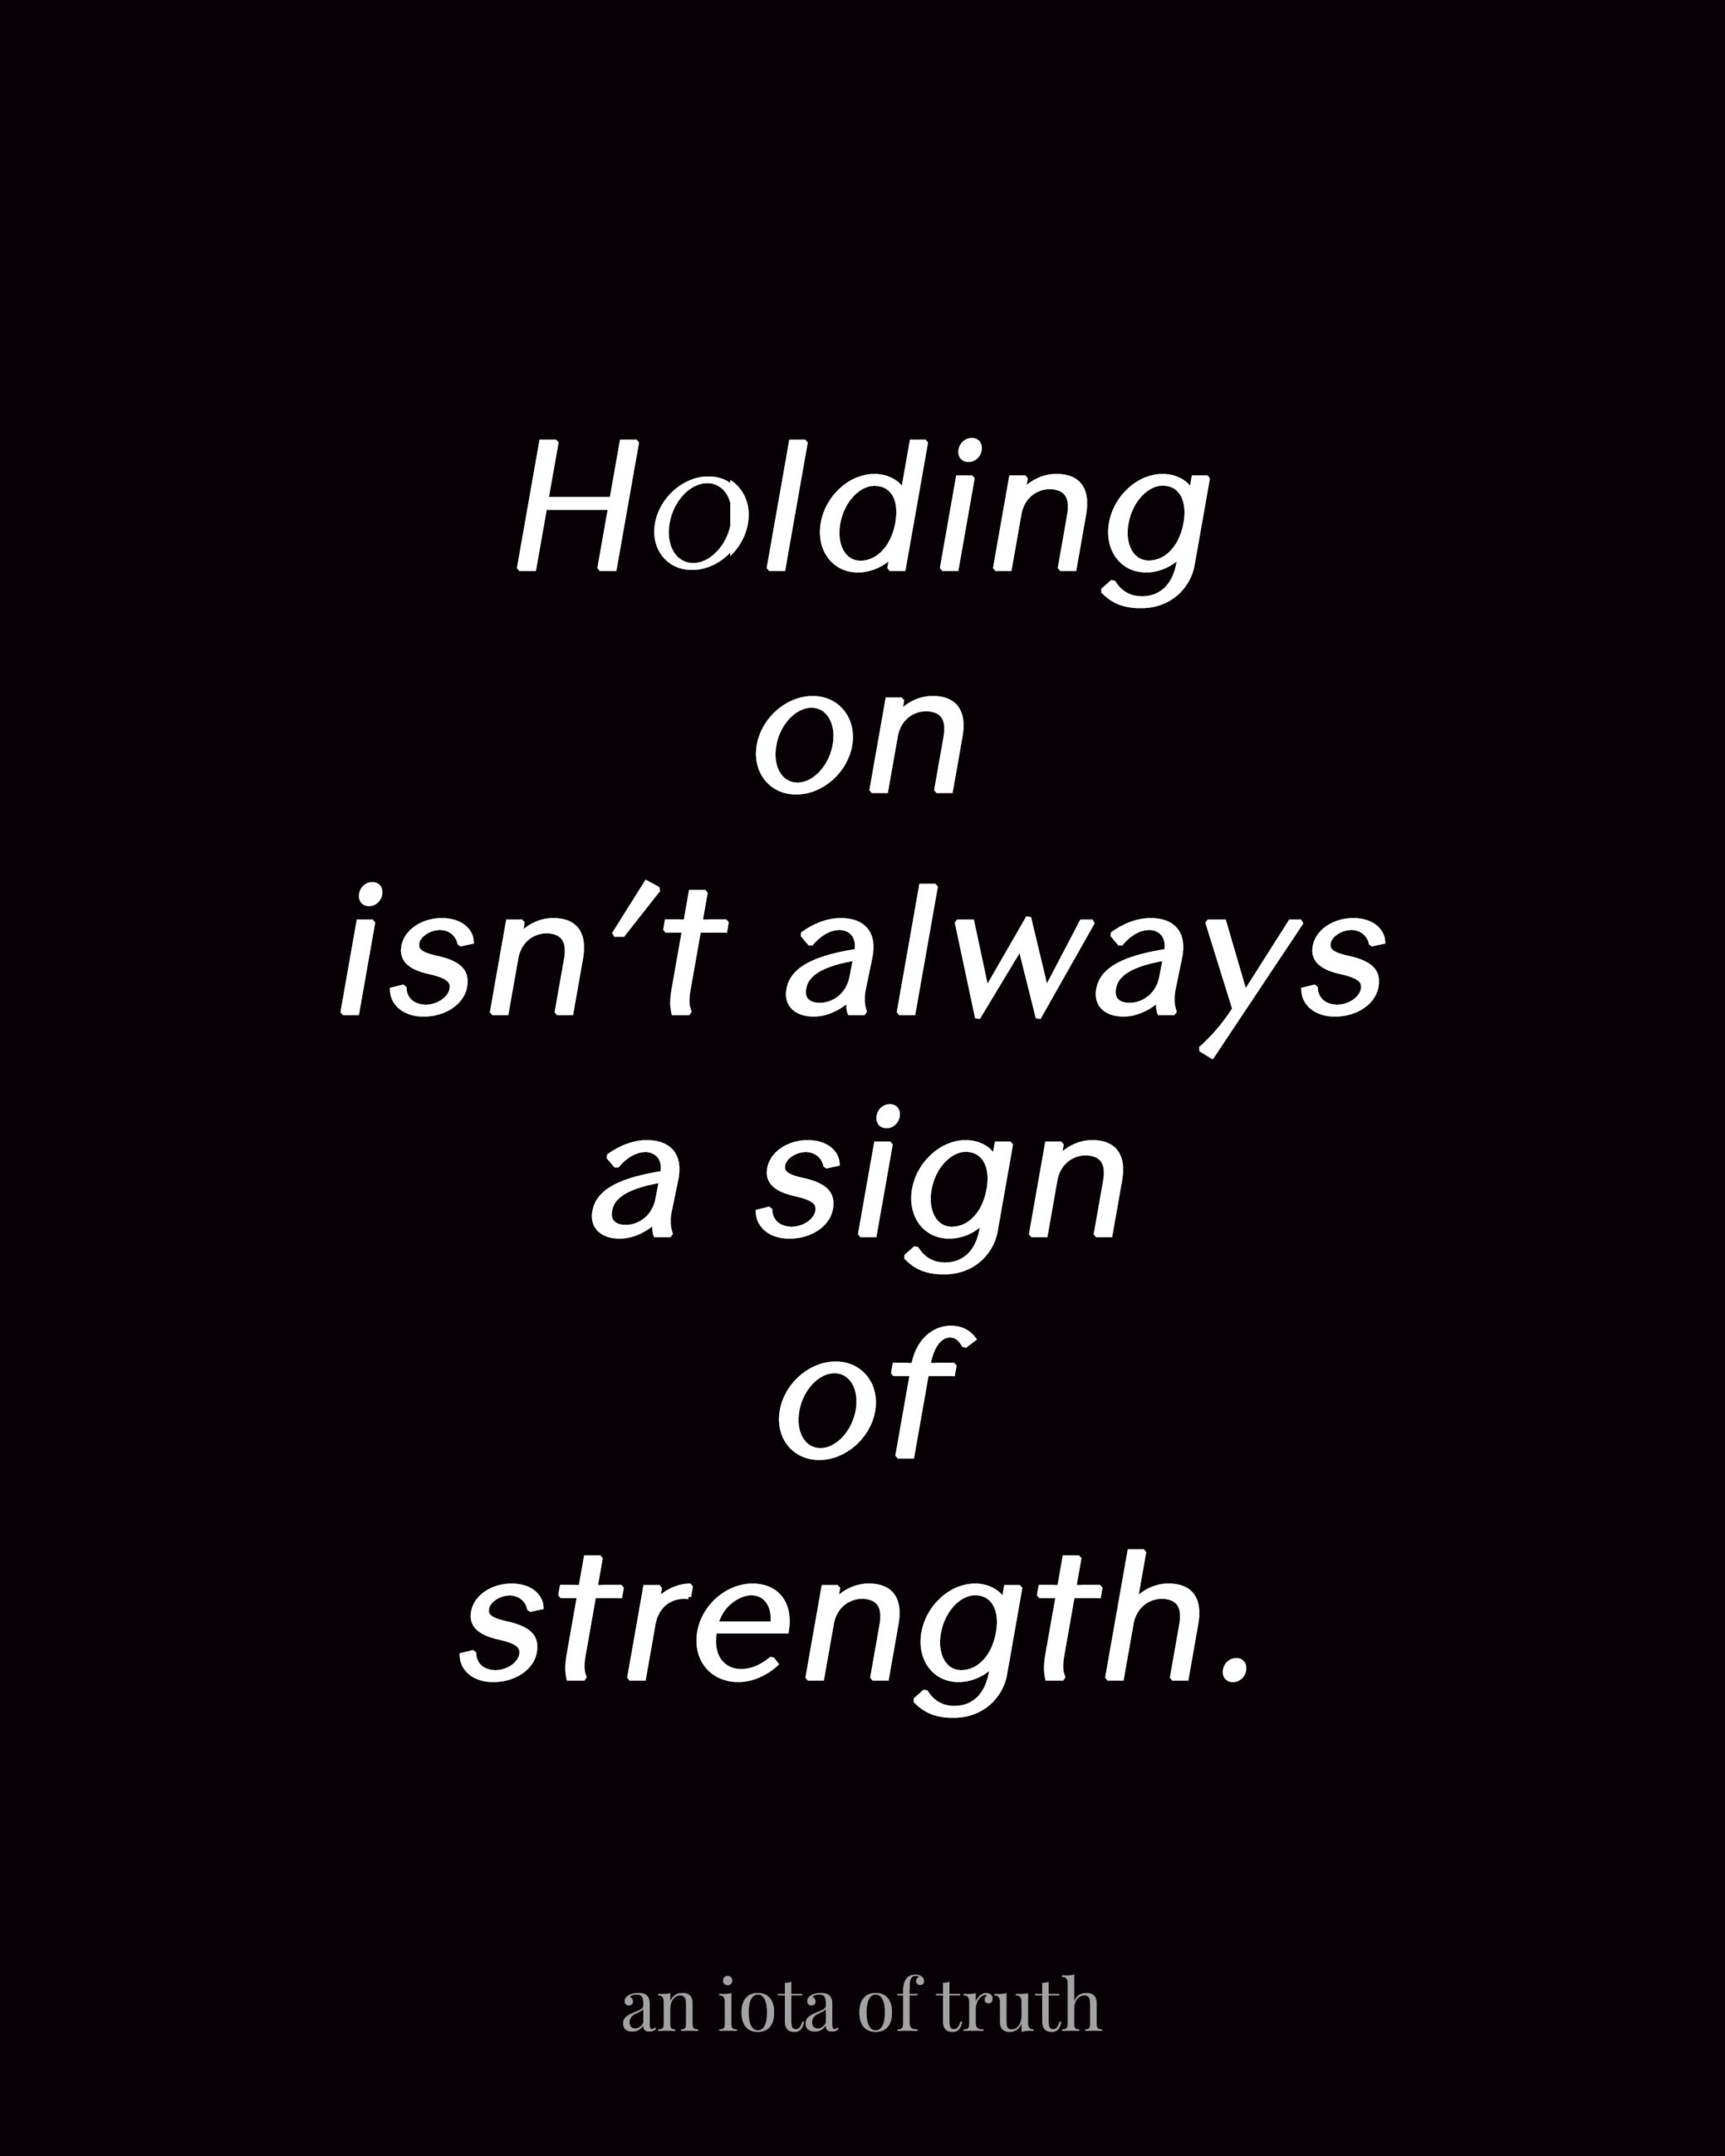 Holding on isn't always a sign of strength.